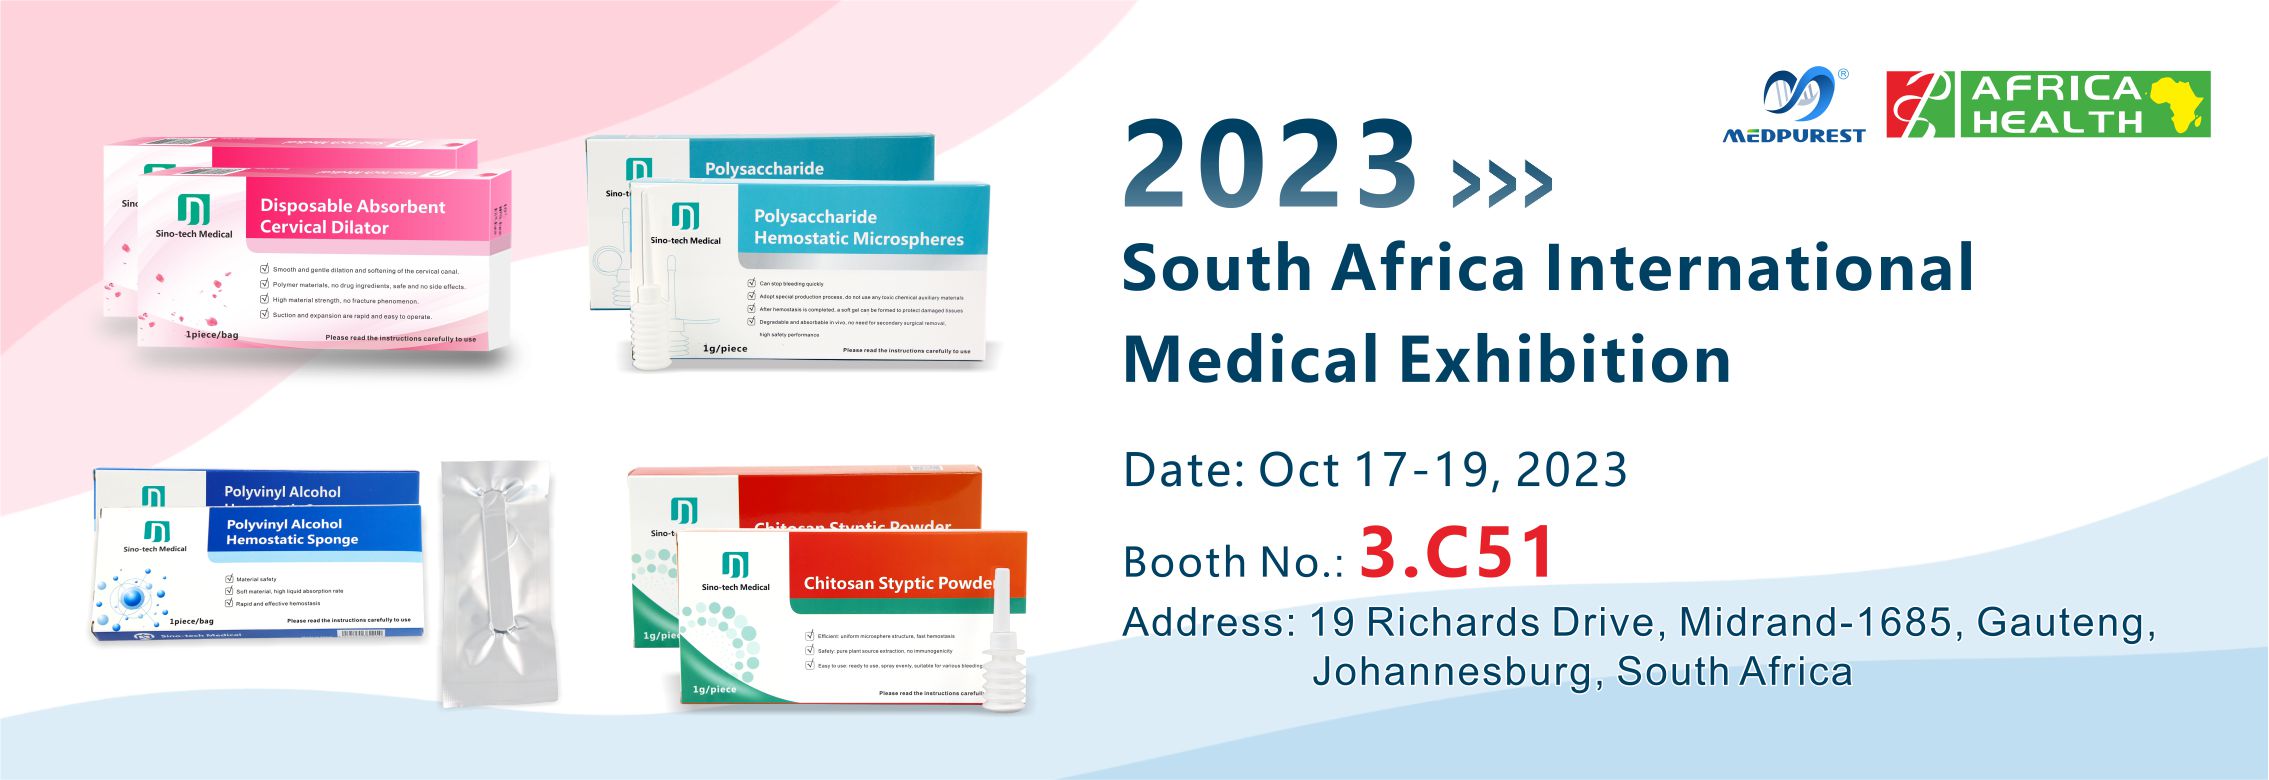 MEDICAL EXHIBITION SOUTH AFRICA